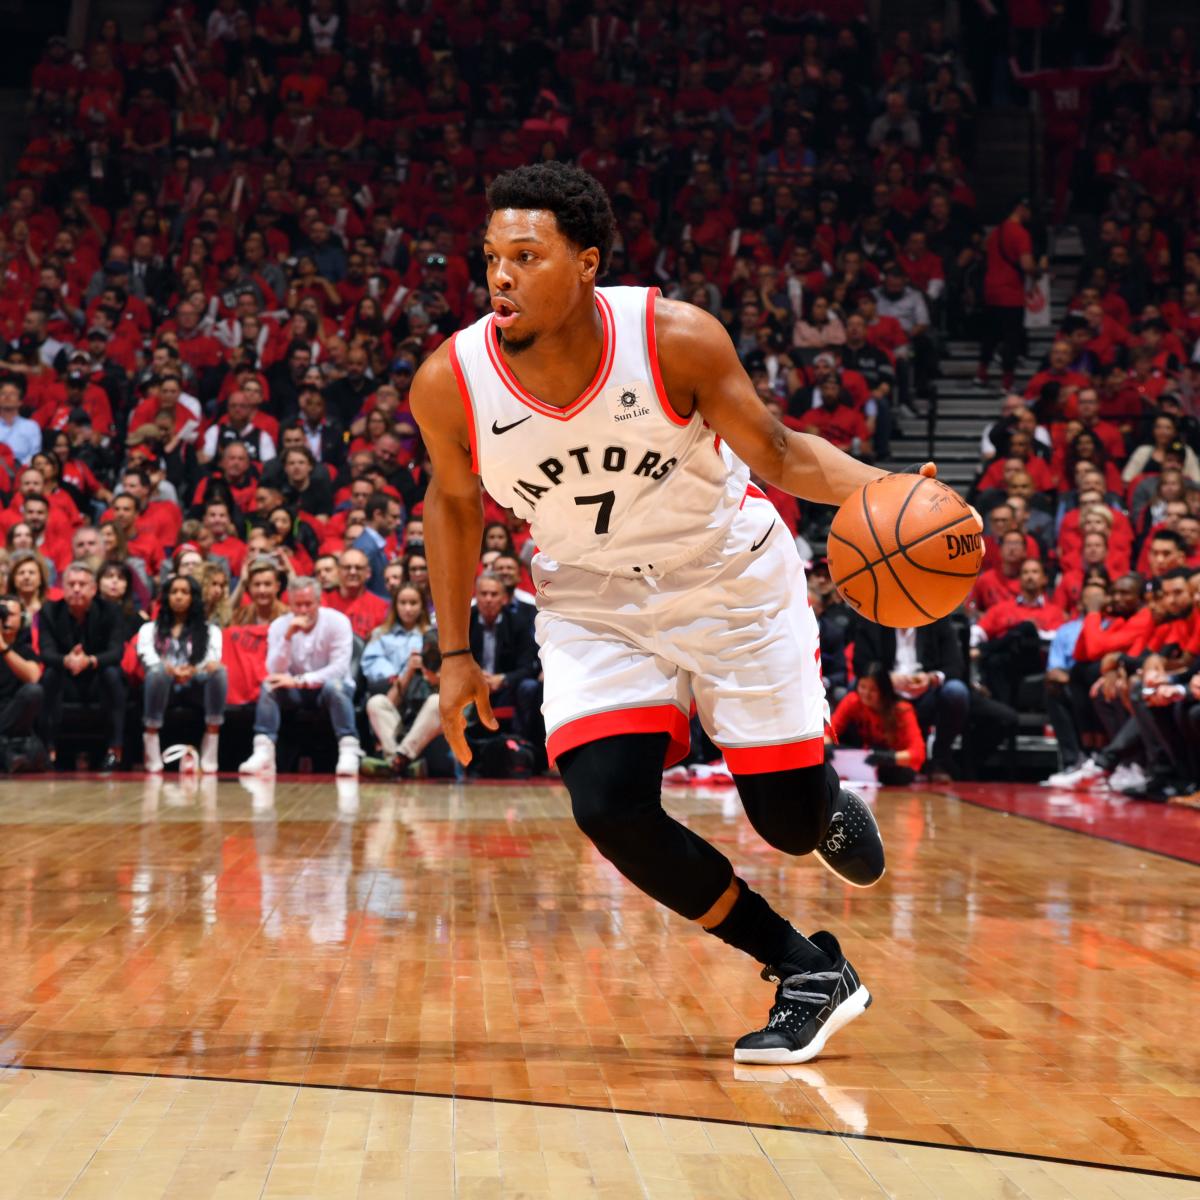 Kyle Lowry Is Rewriting His Playoff History in the Eastern Conference